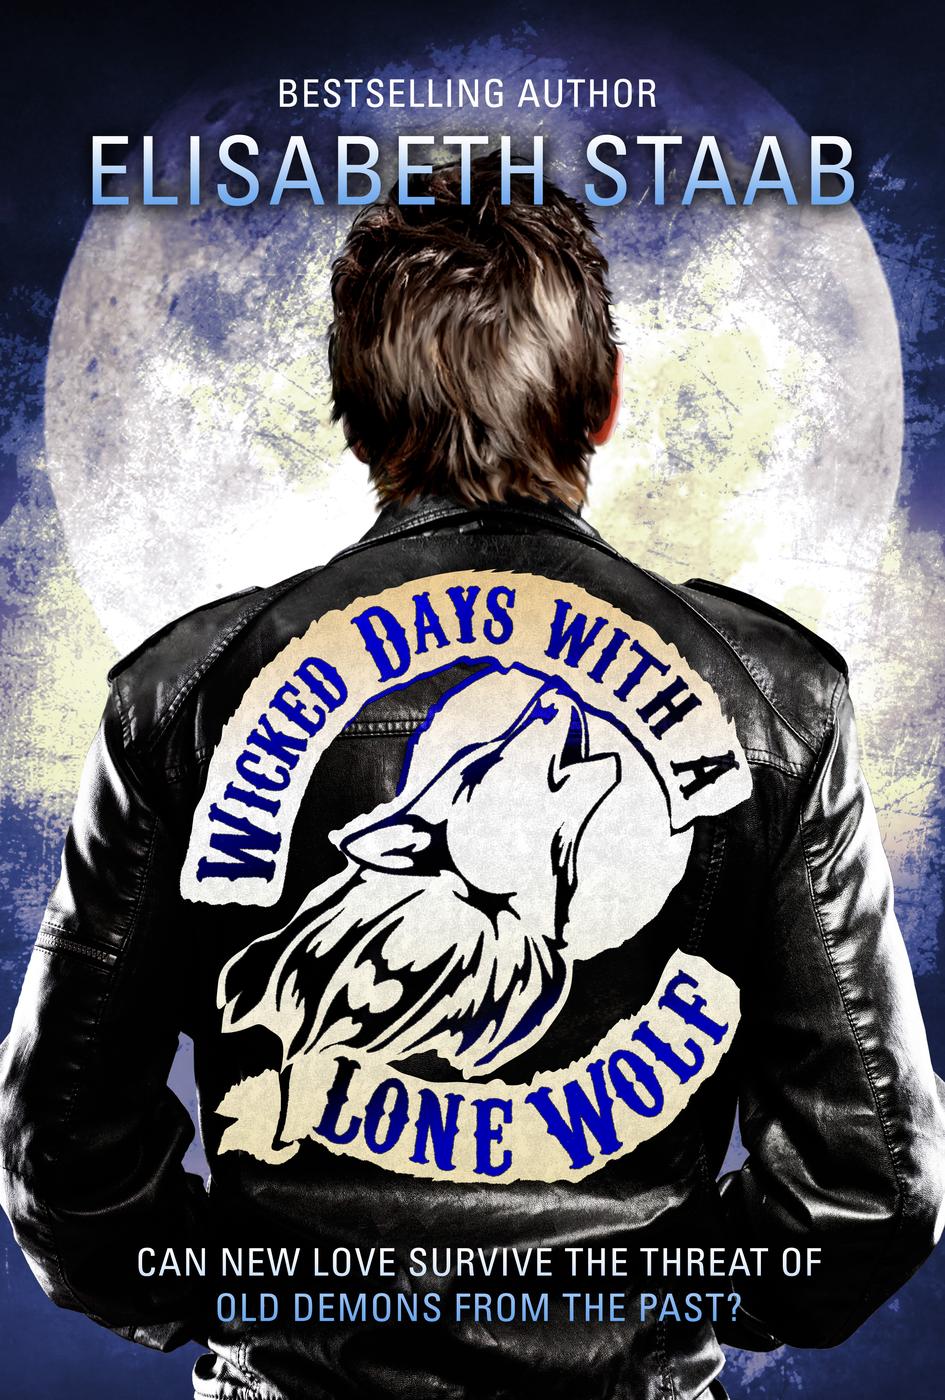 Wicked Days with a Lone Wolf (2015) by Elisabeth Staab